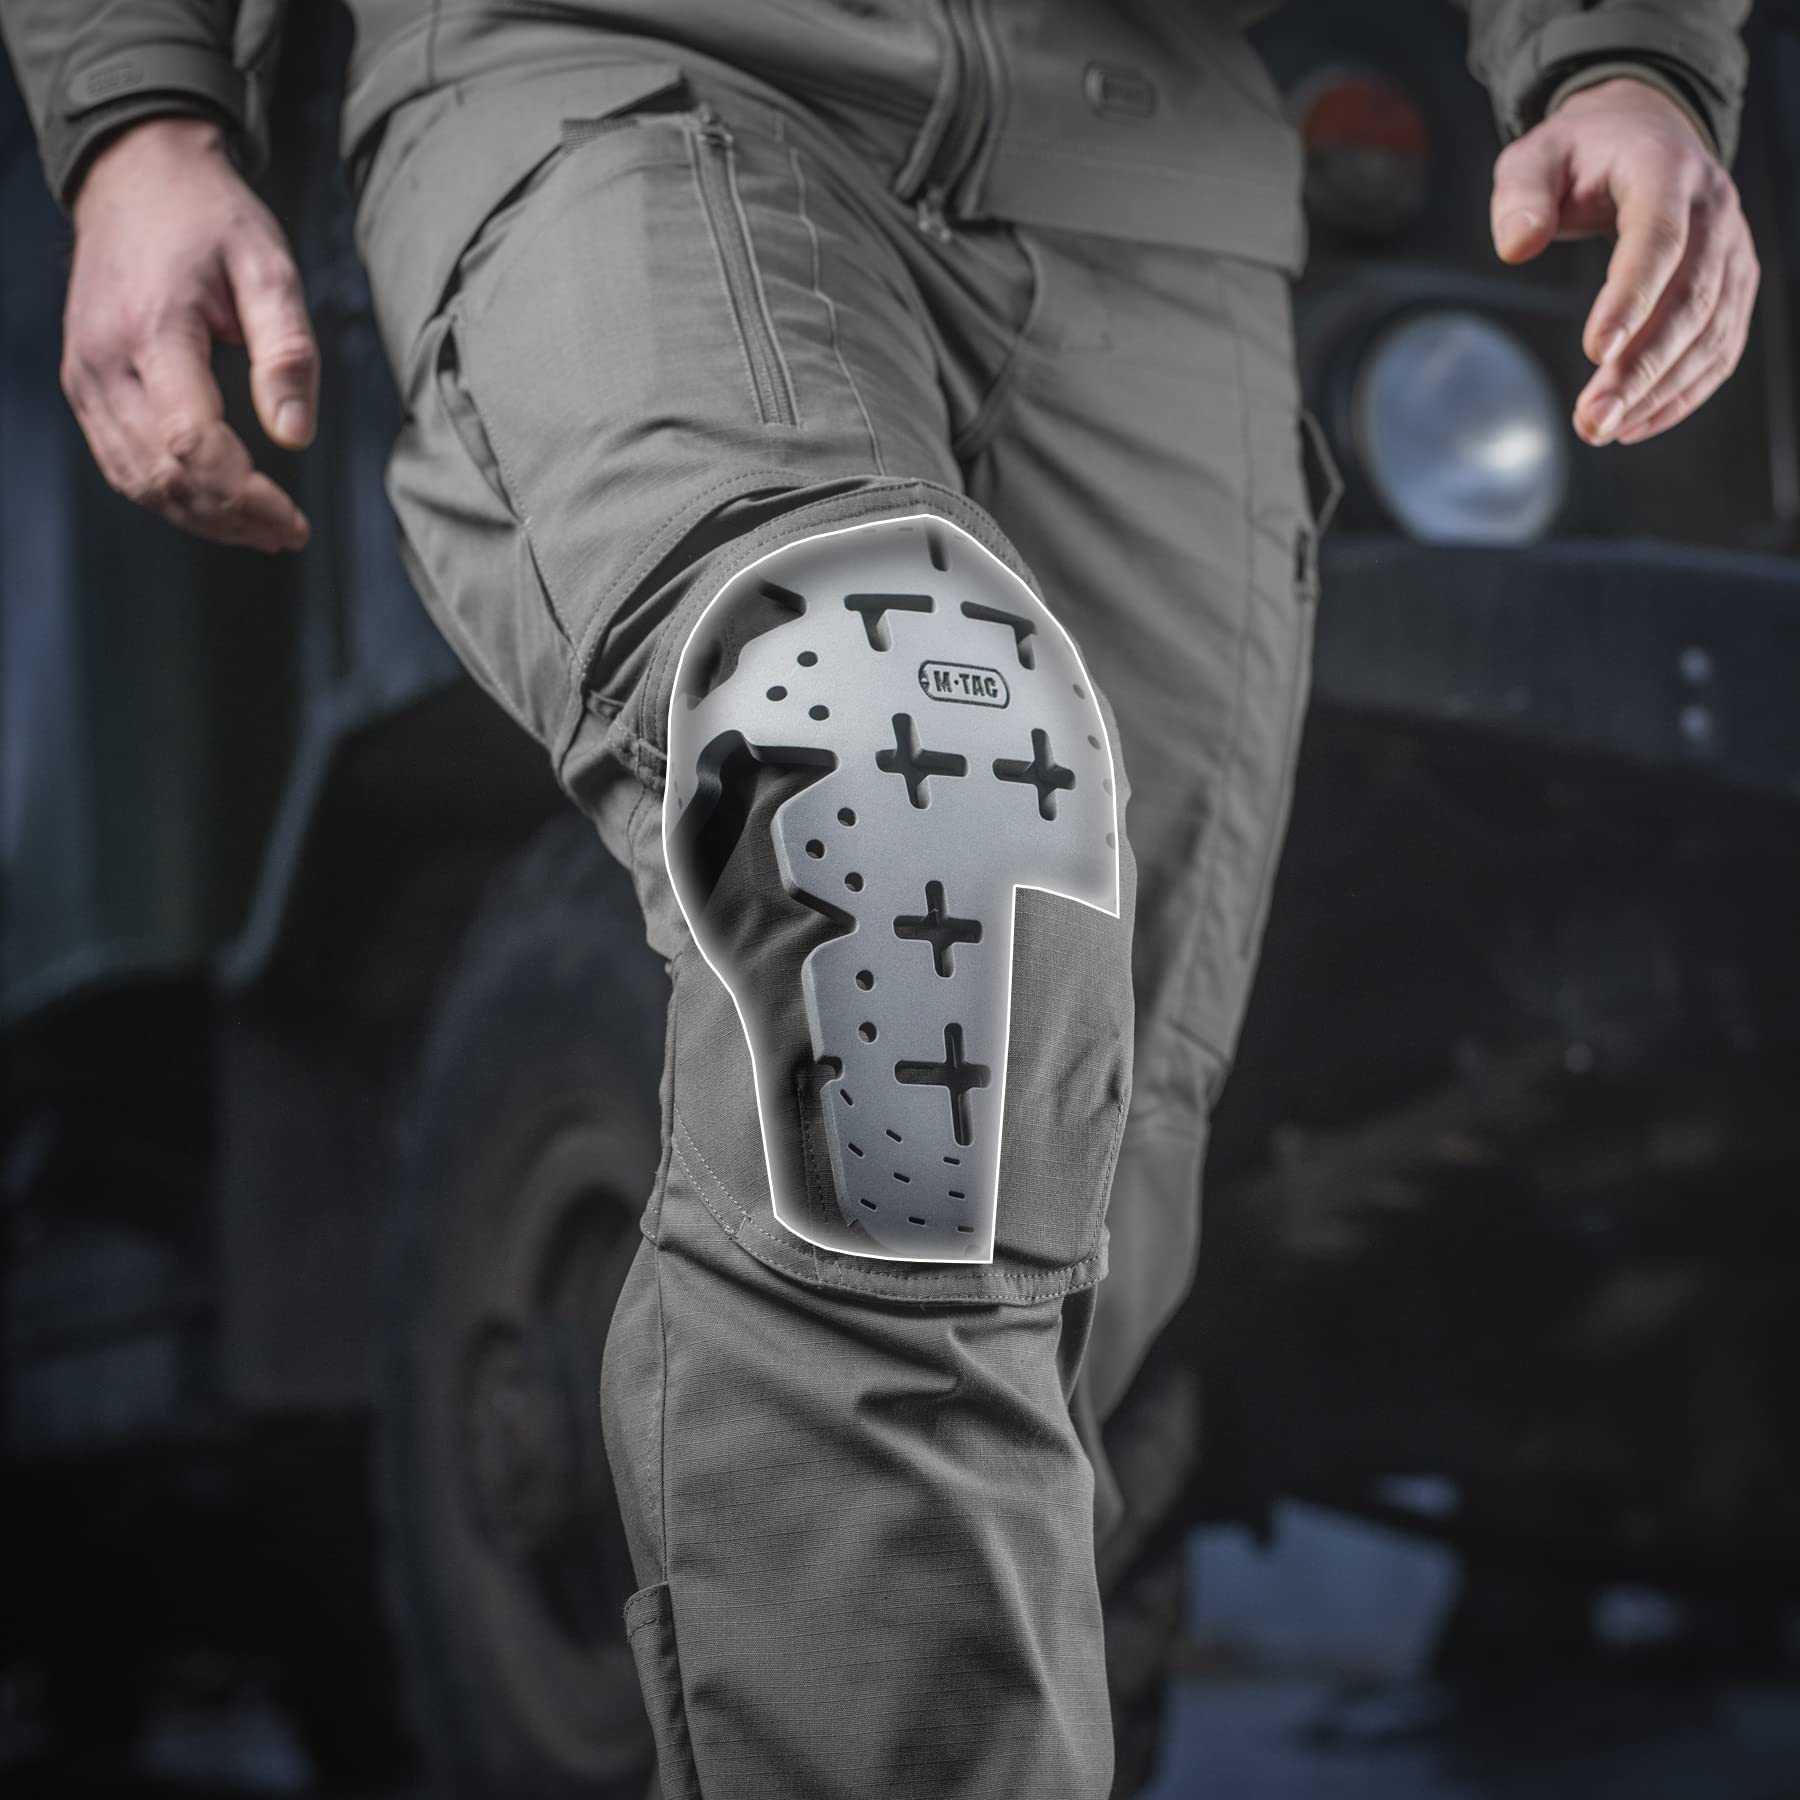  M-Tac Knee pad inserts for tactical and work pants memory foam  elbow pads : Sports & Outdoors